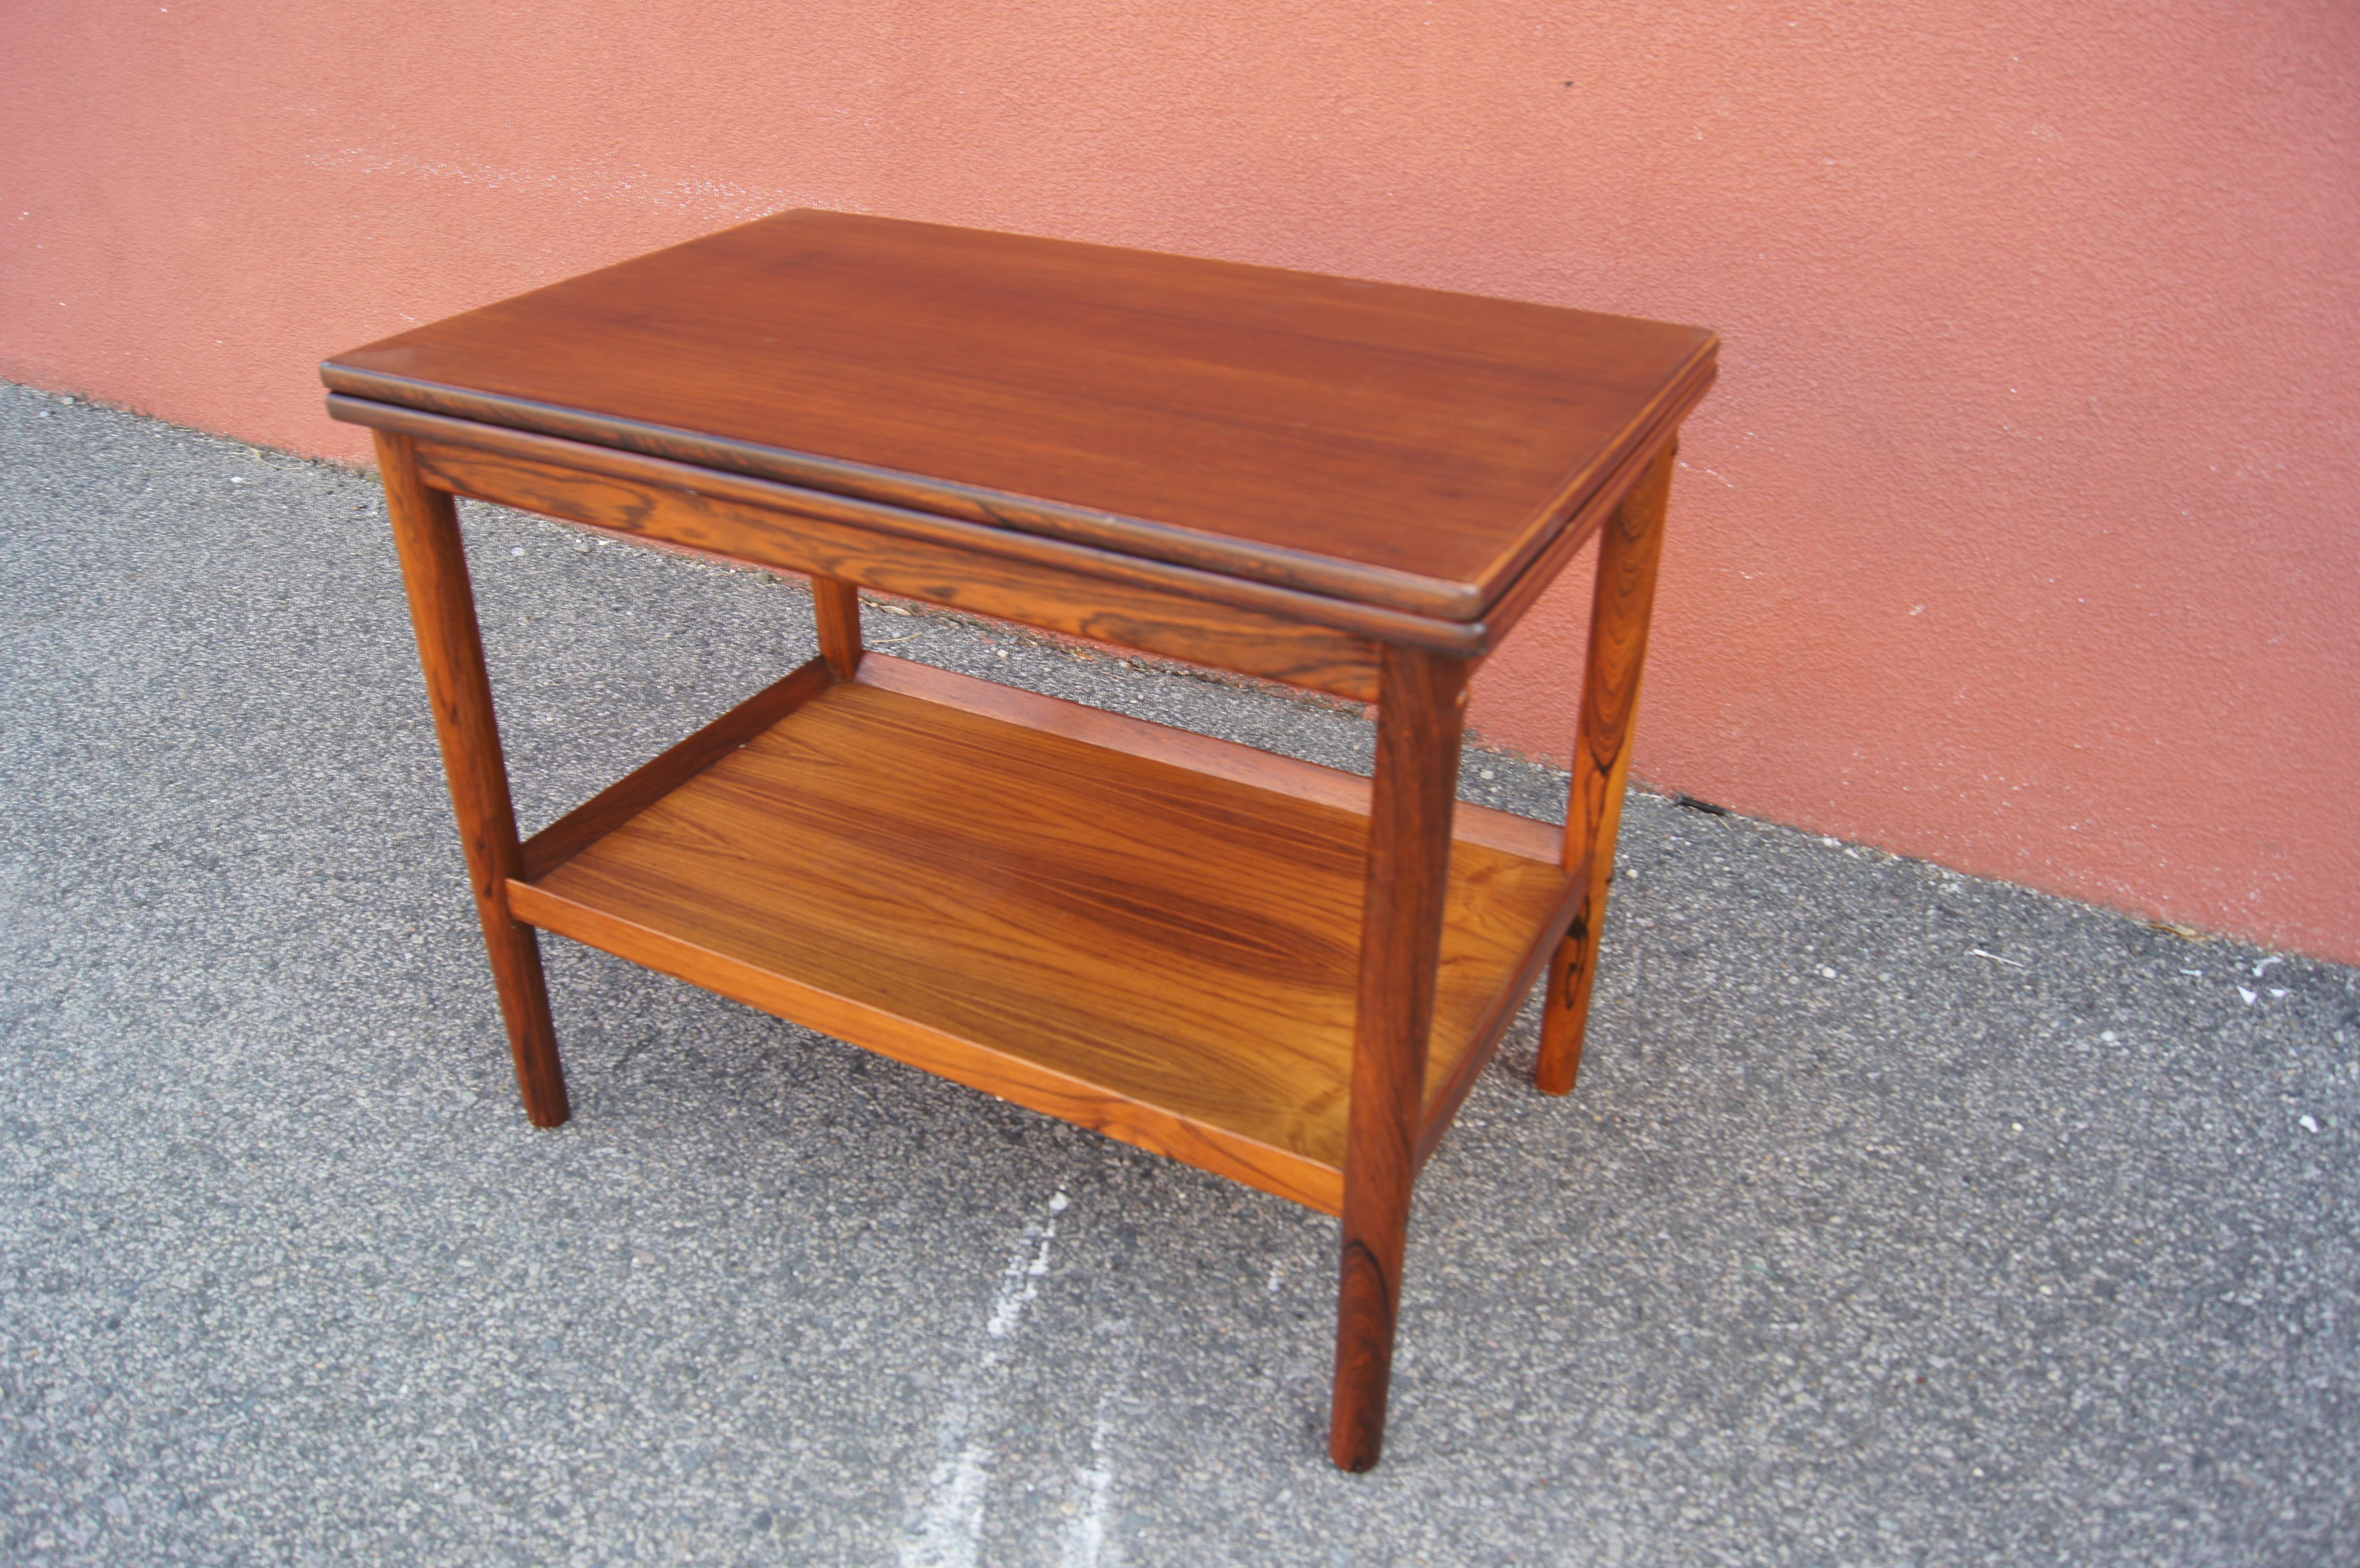 This clever midcentury Danish table has a rosewood frame with two tiers, a lower rimmed shelf and a top that expands the surface area with a twist and flip.
 
When the flip top is fully open, the table top measures 35.75 inches.
 